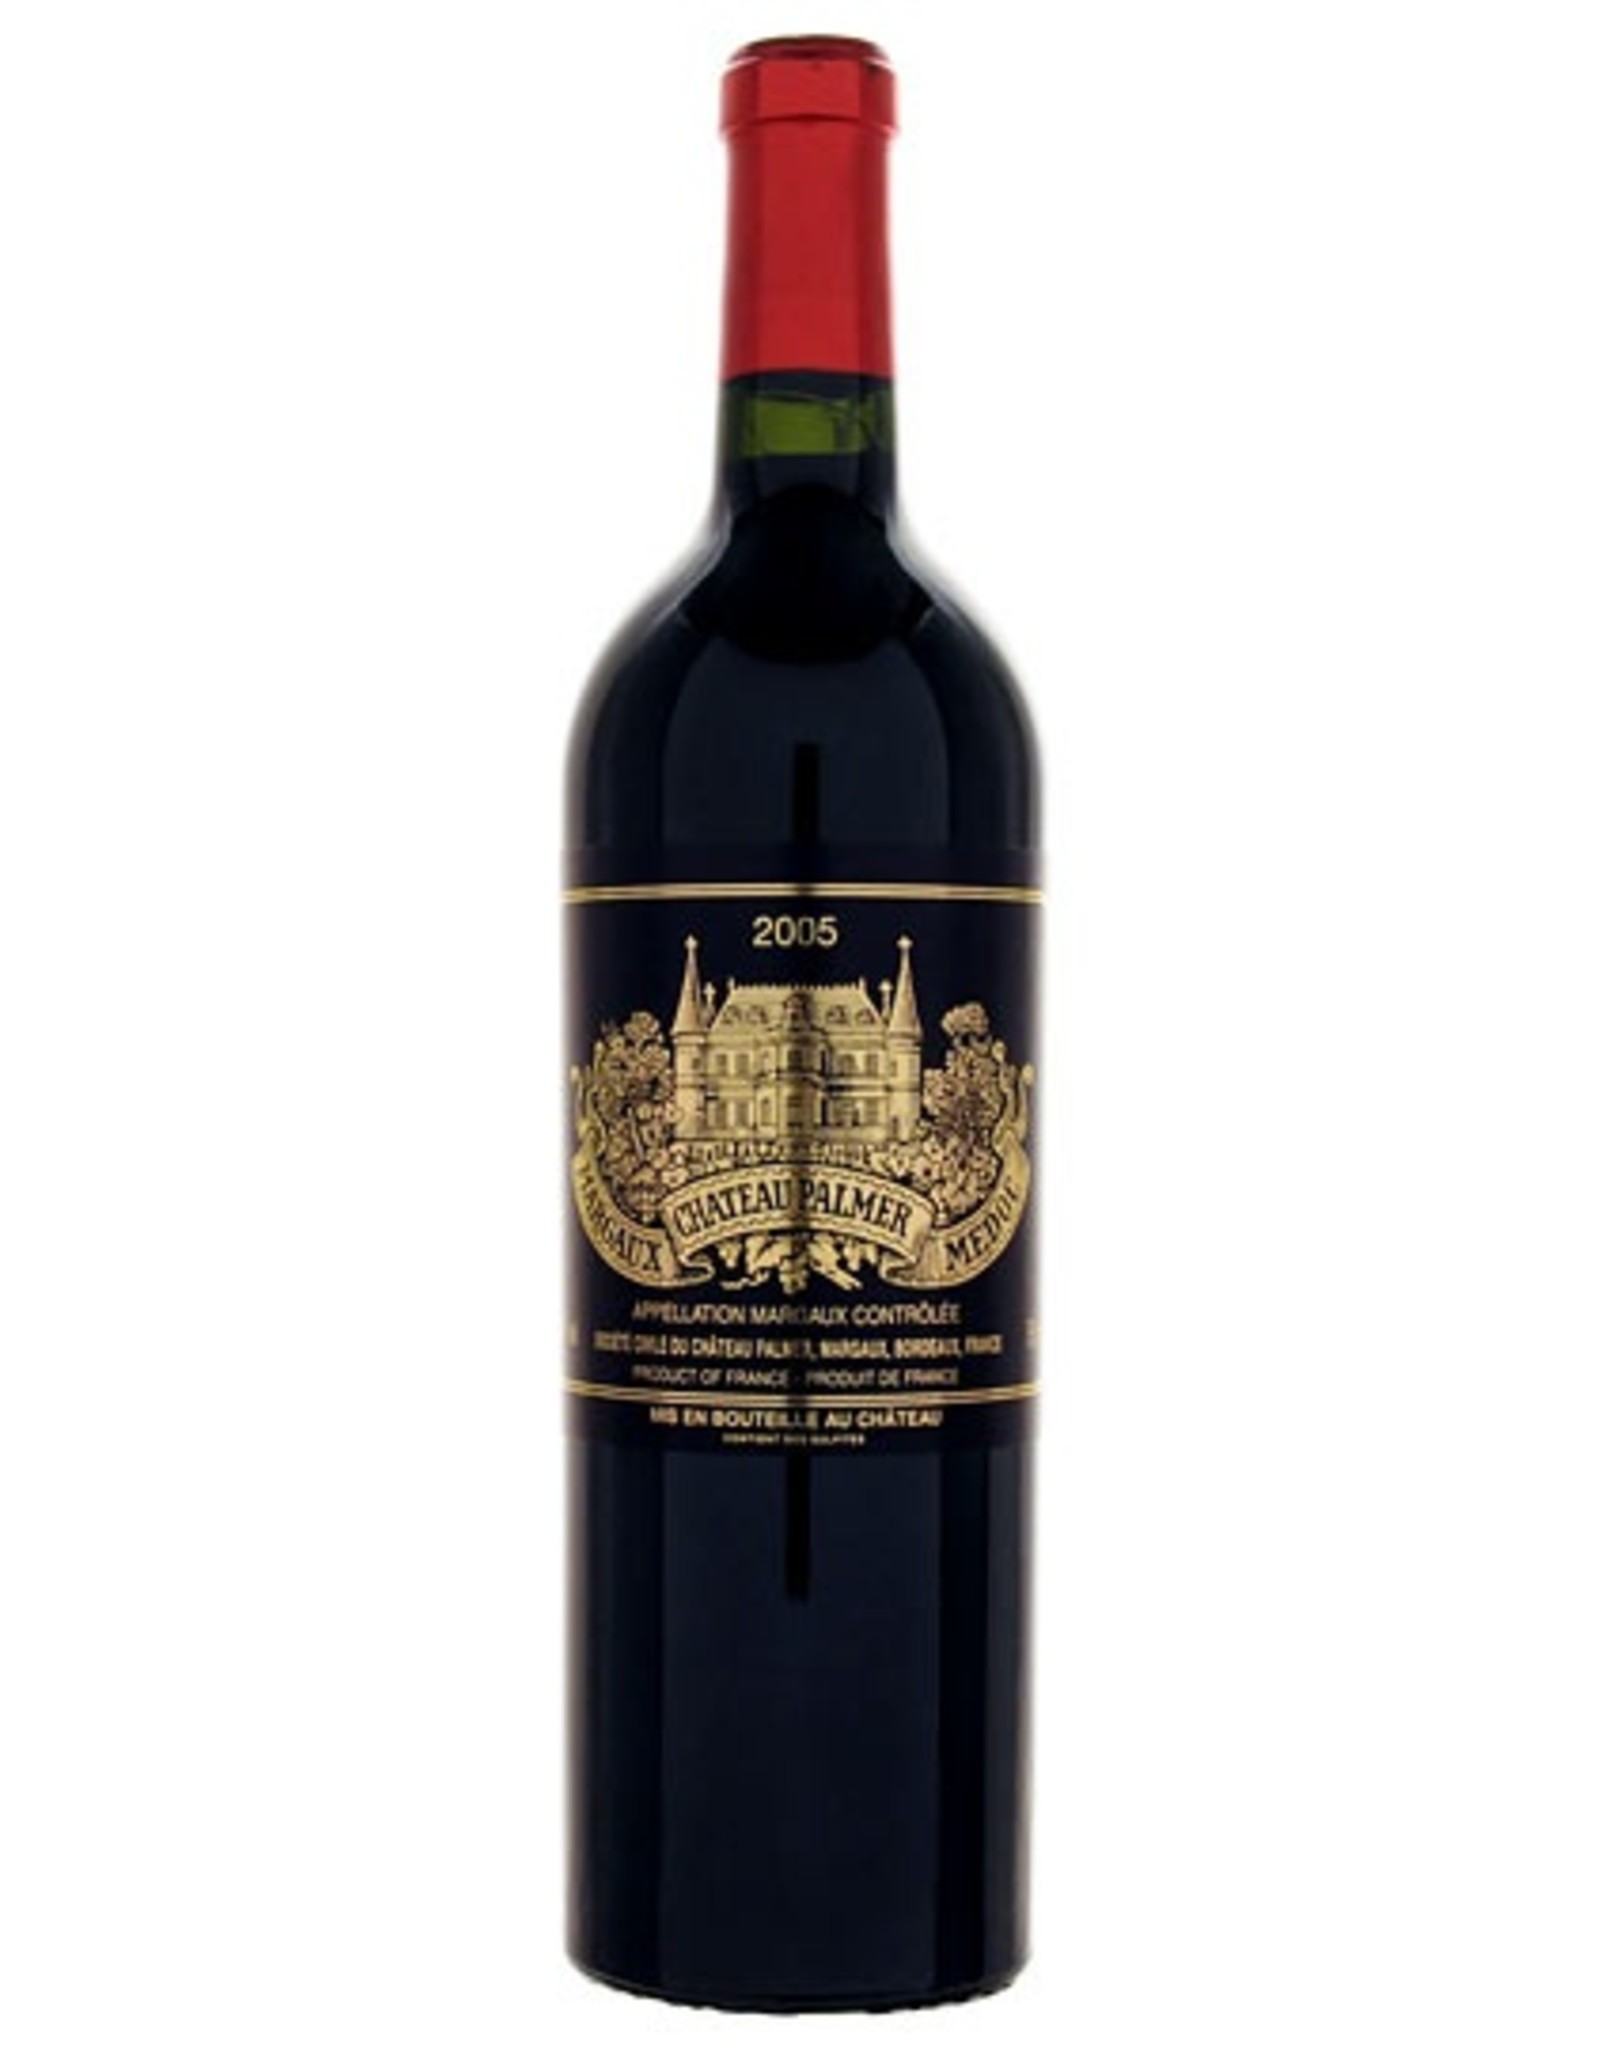 Red Wine 2005, Chateau Palmer 3rd Growth, Red Bordeaux Blend, Margaux, Bordeaux, France, 14% Alc, CT95, RP 97